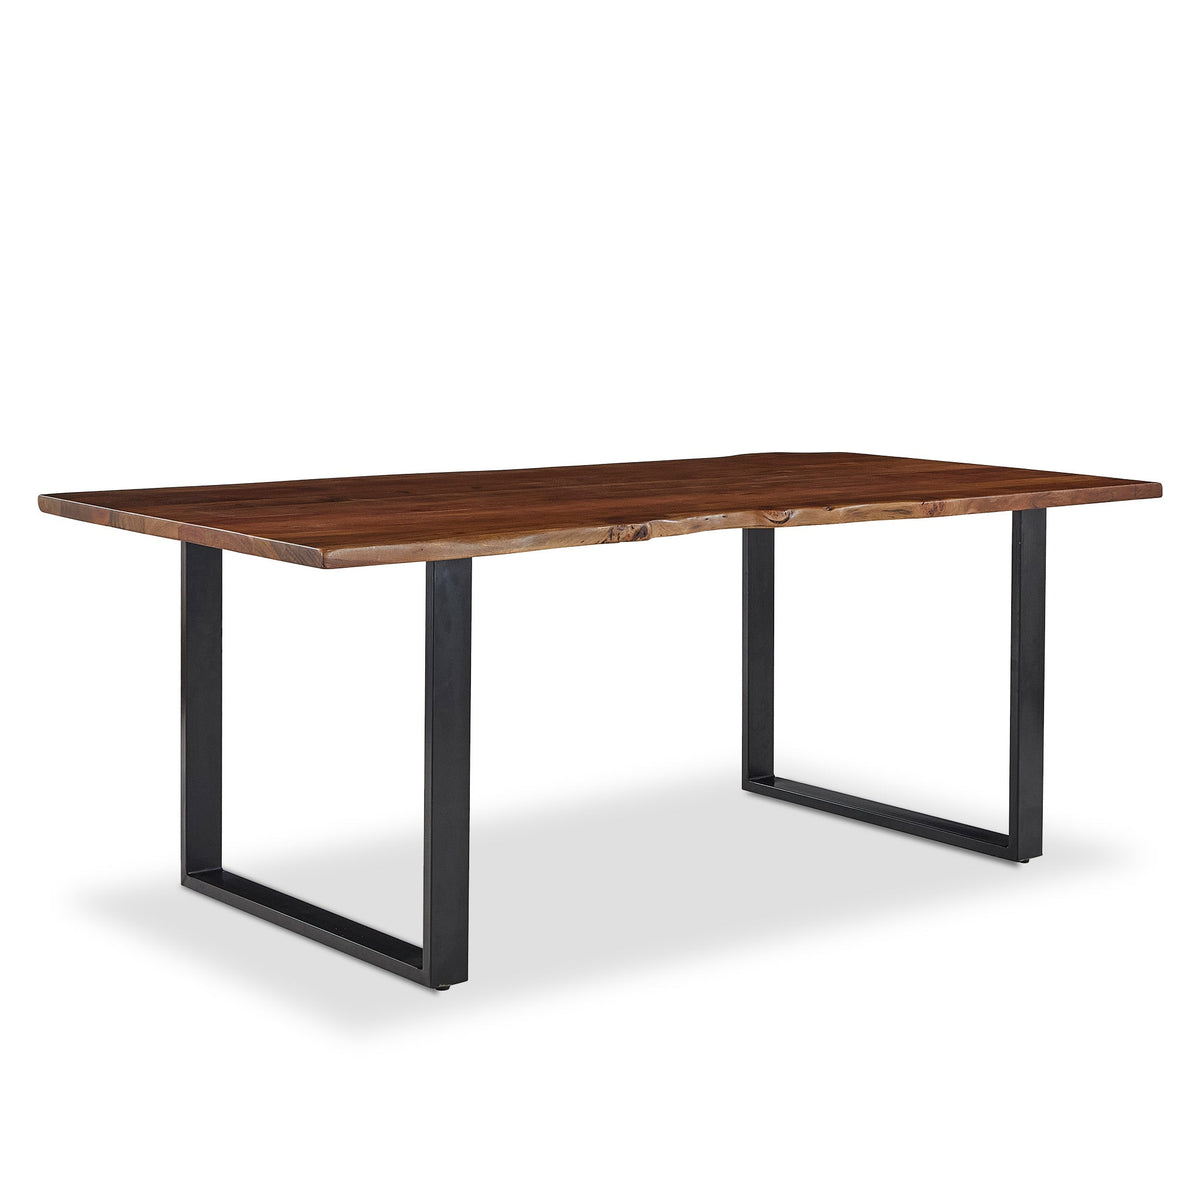 Acacia Wood Live Edge Dining Table with Iron Base from Roseland